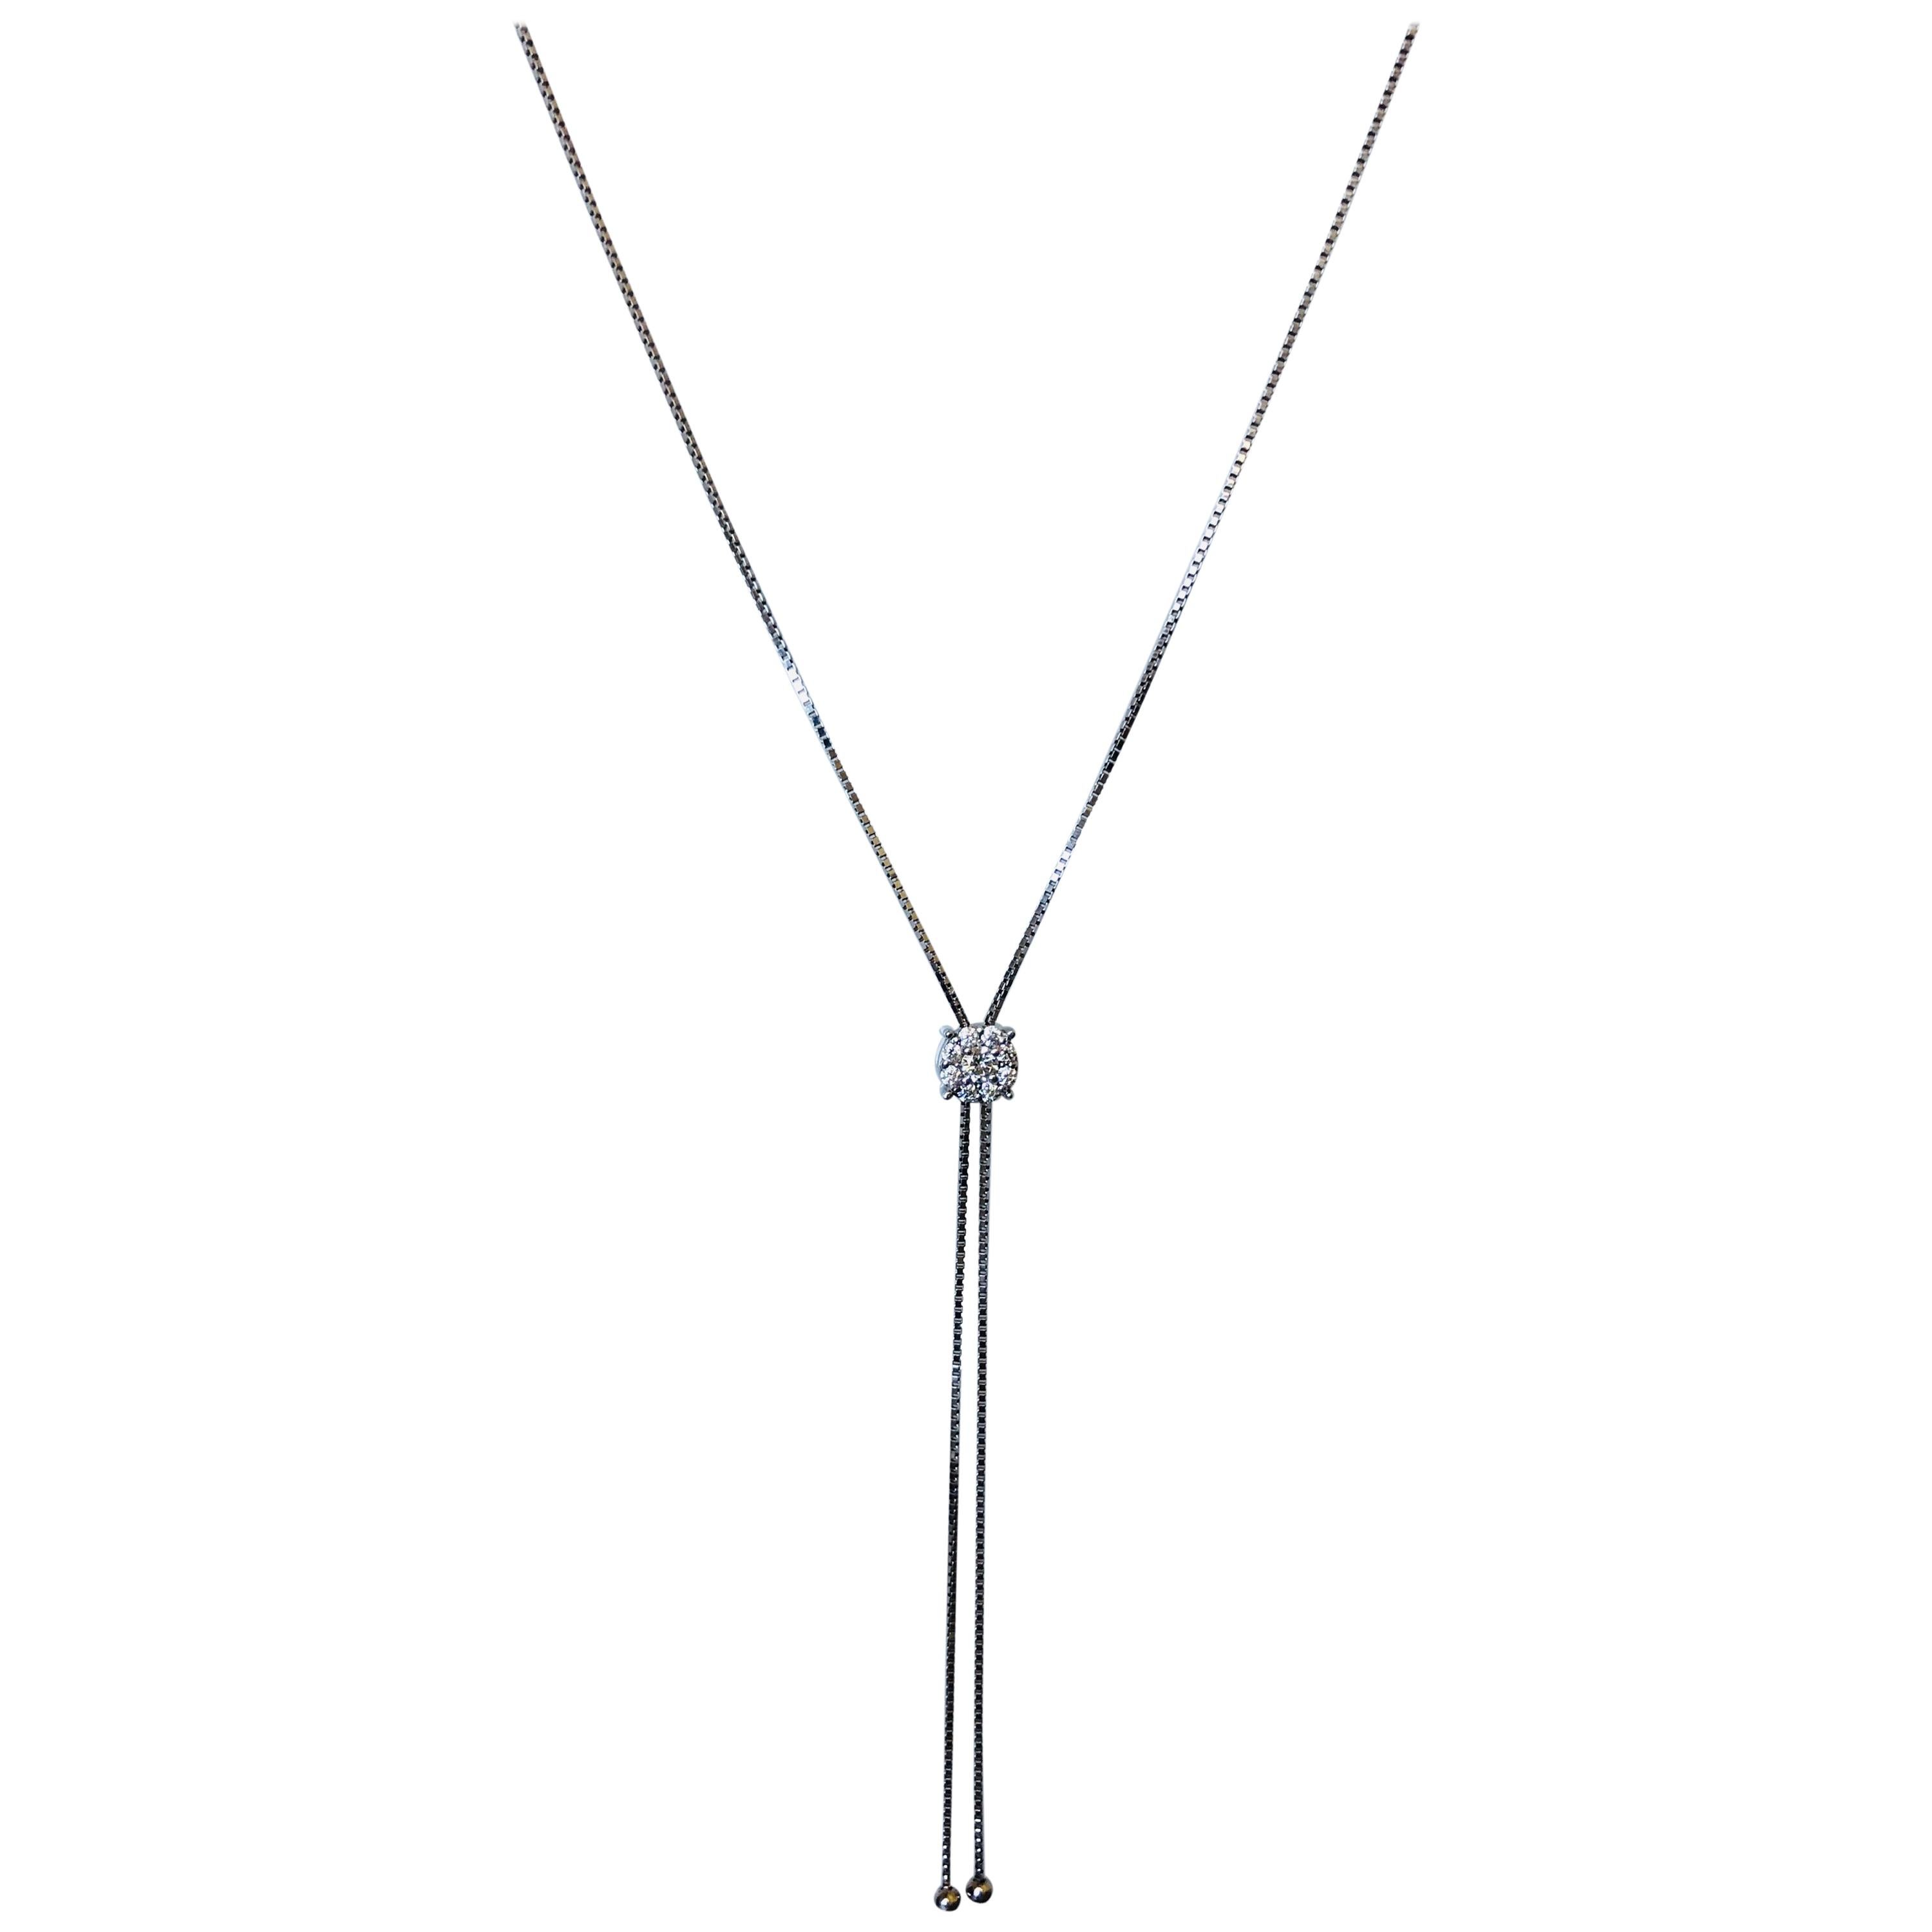 0.37 Carat Diamond Lariat Style Necklace in 14 Karat White Gold For Sale